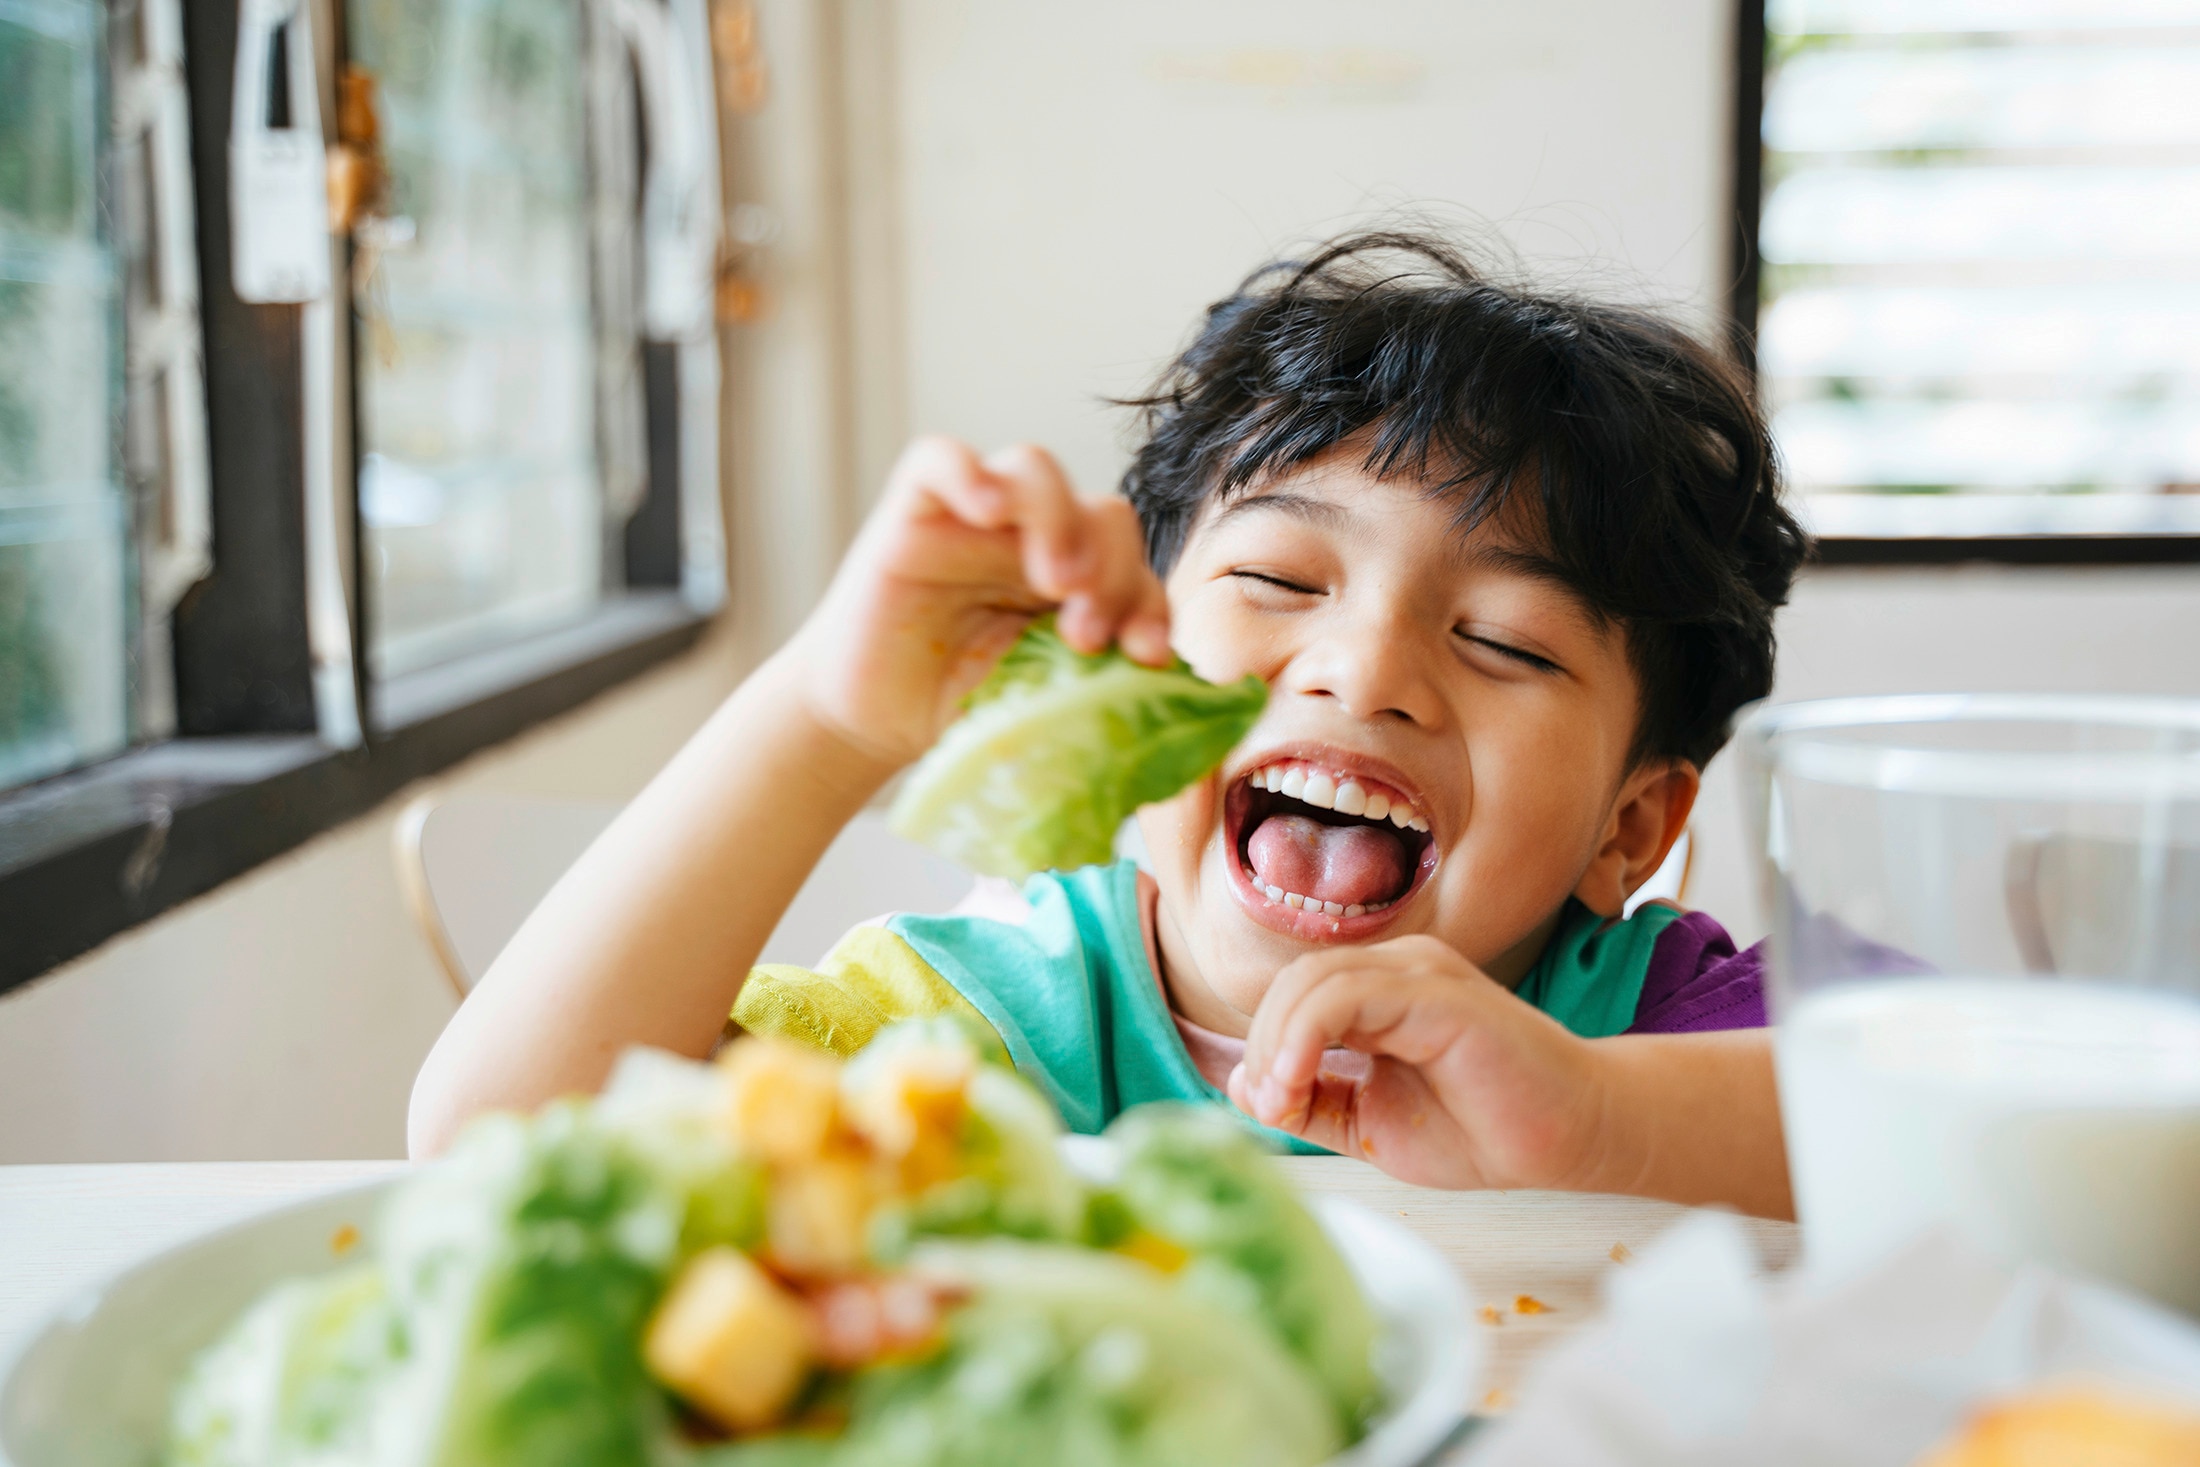 A young boy happily eating leafy vegetables